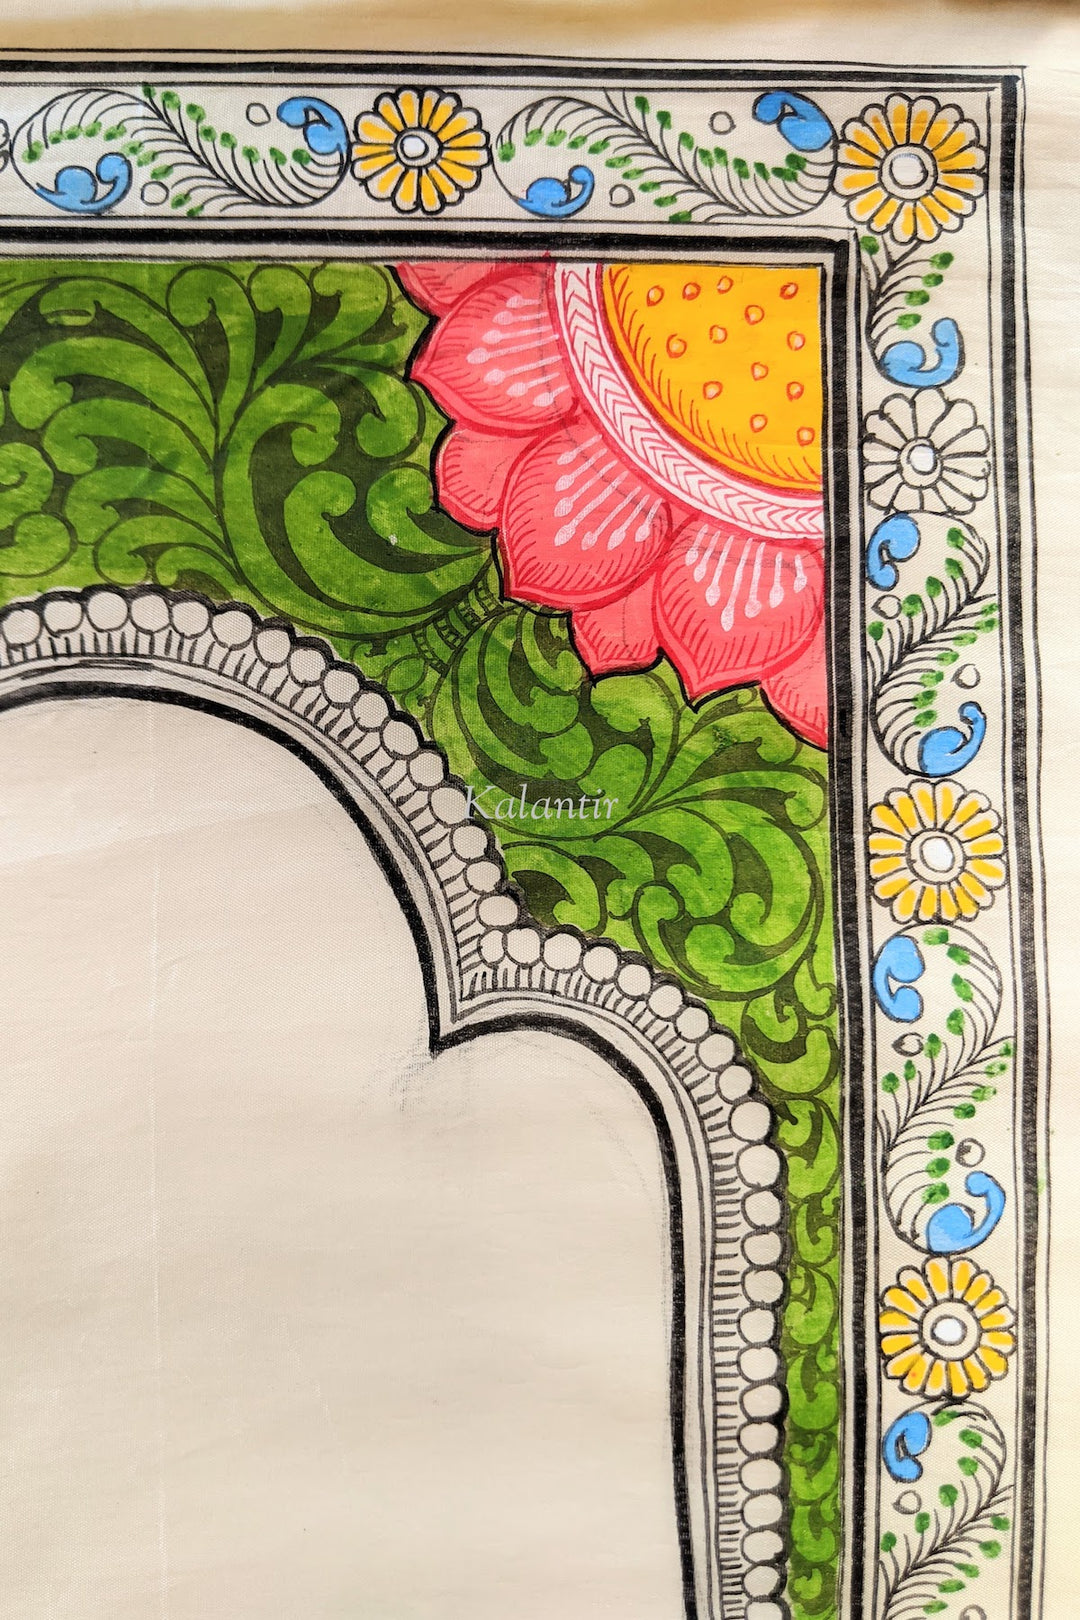 Closer view of the floral motifs in the border of this Saura Art form